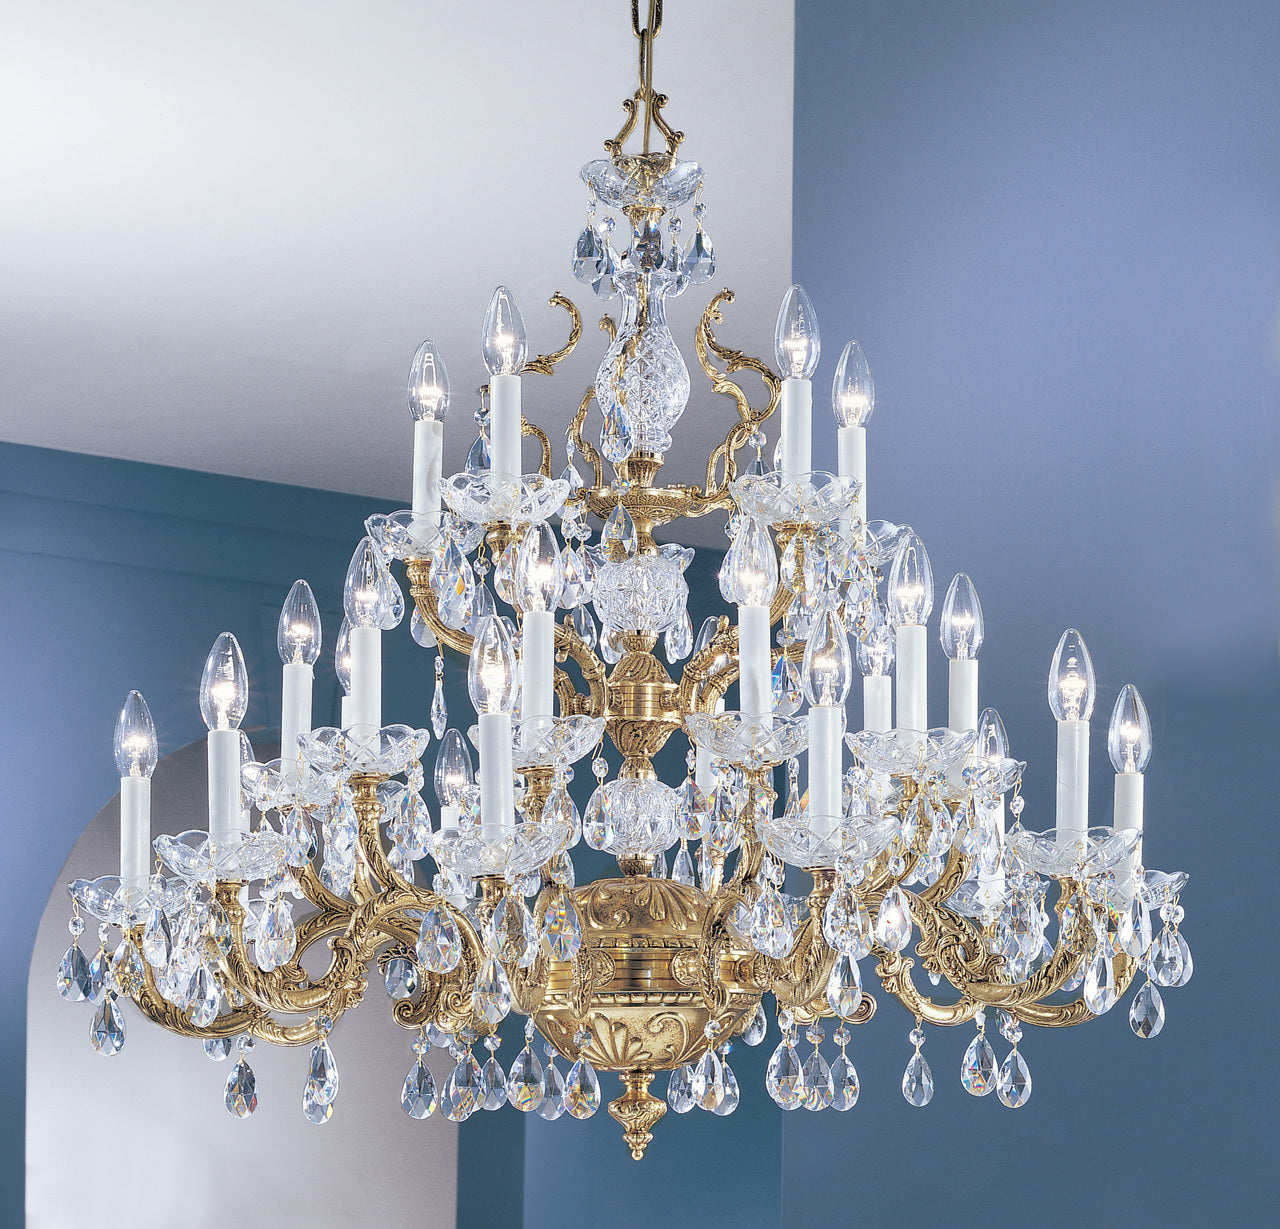 Classic Lighting 5535 OWB S Madrid Crystal/Cast Brass Chandelier in Olde World Bronze (Imported from Spain)